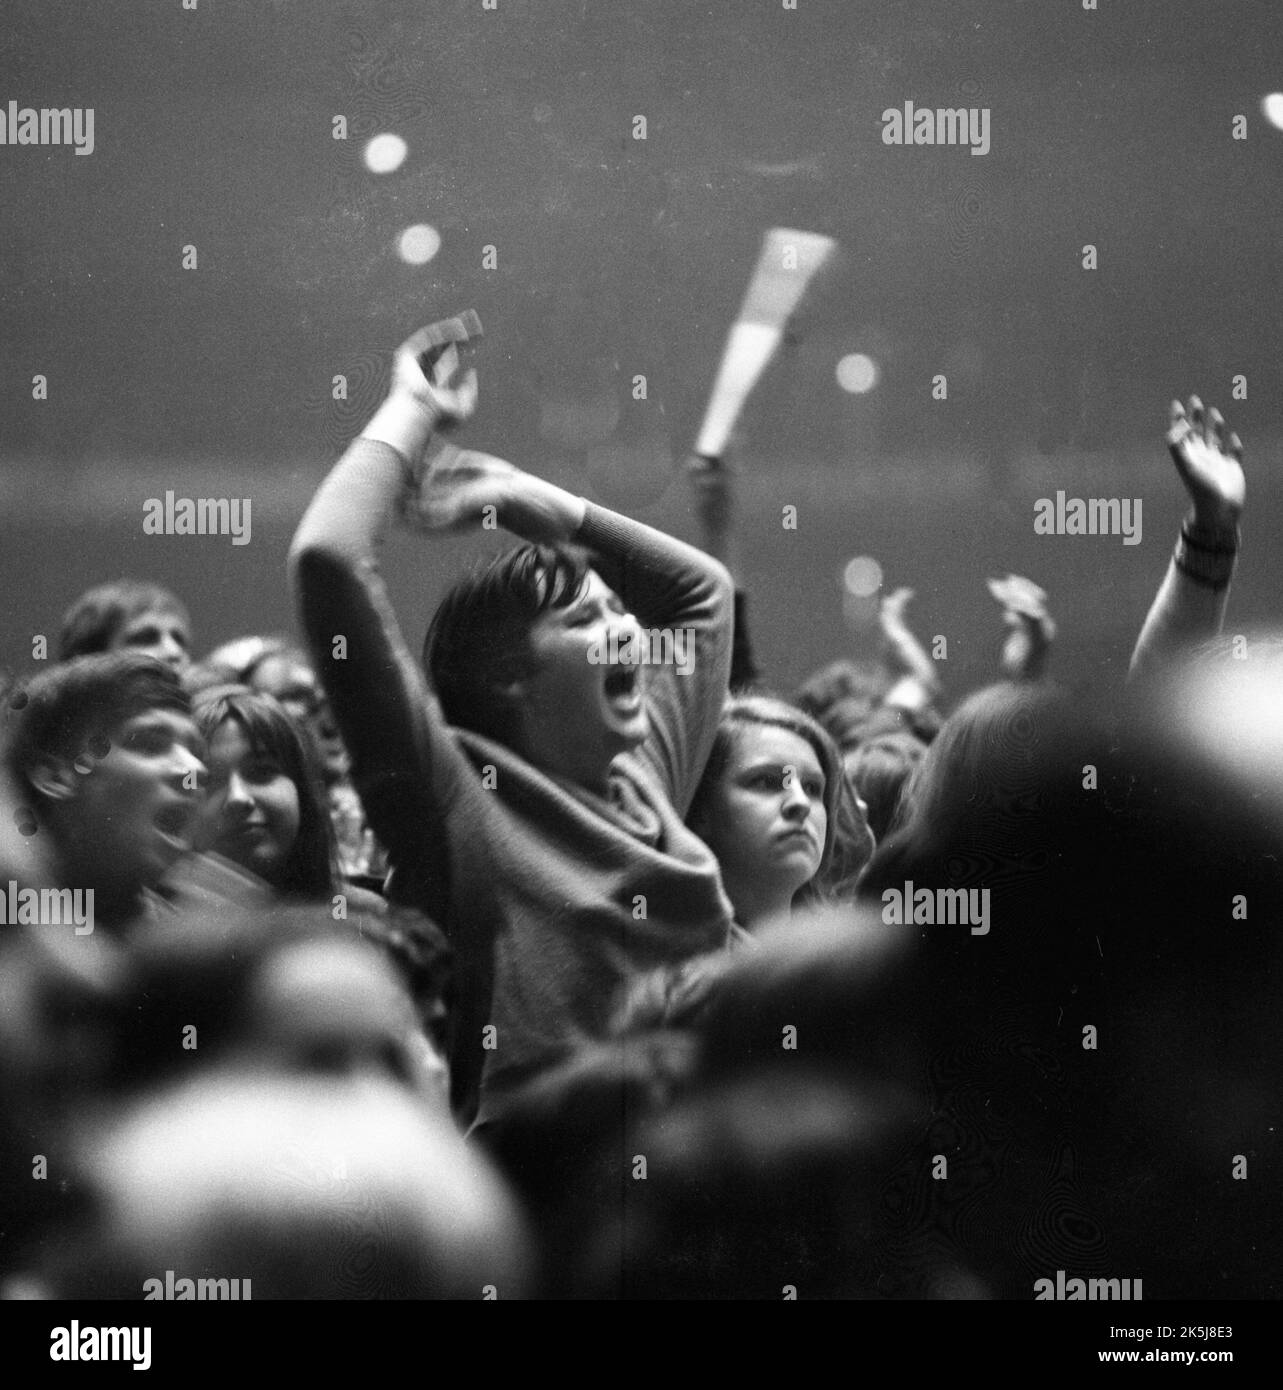 The Rolling Stones' performance in Dortmund's Westfalenhalle in 1966 was accompanied by some fans who got into a frenzy, Germany Stock Photo